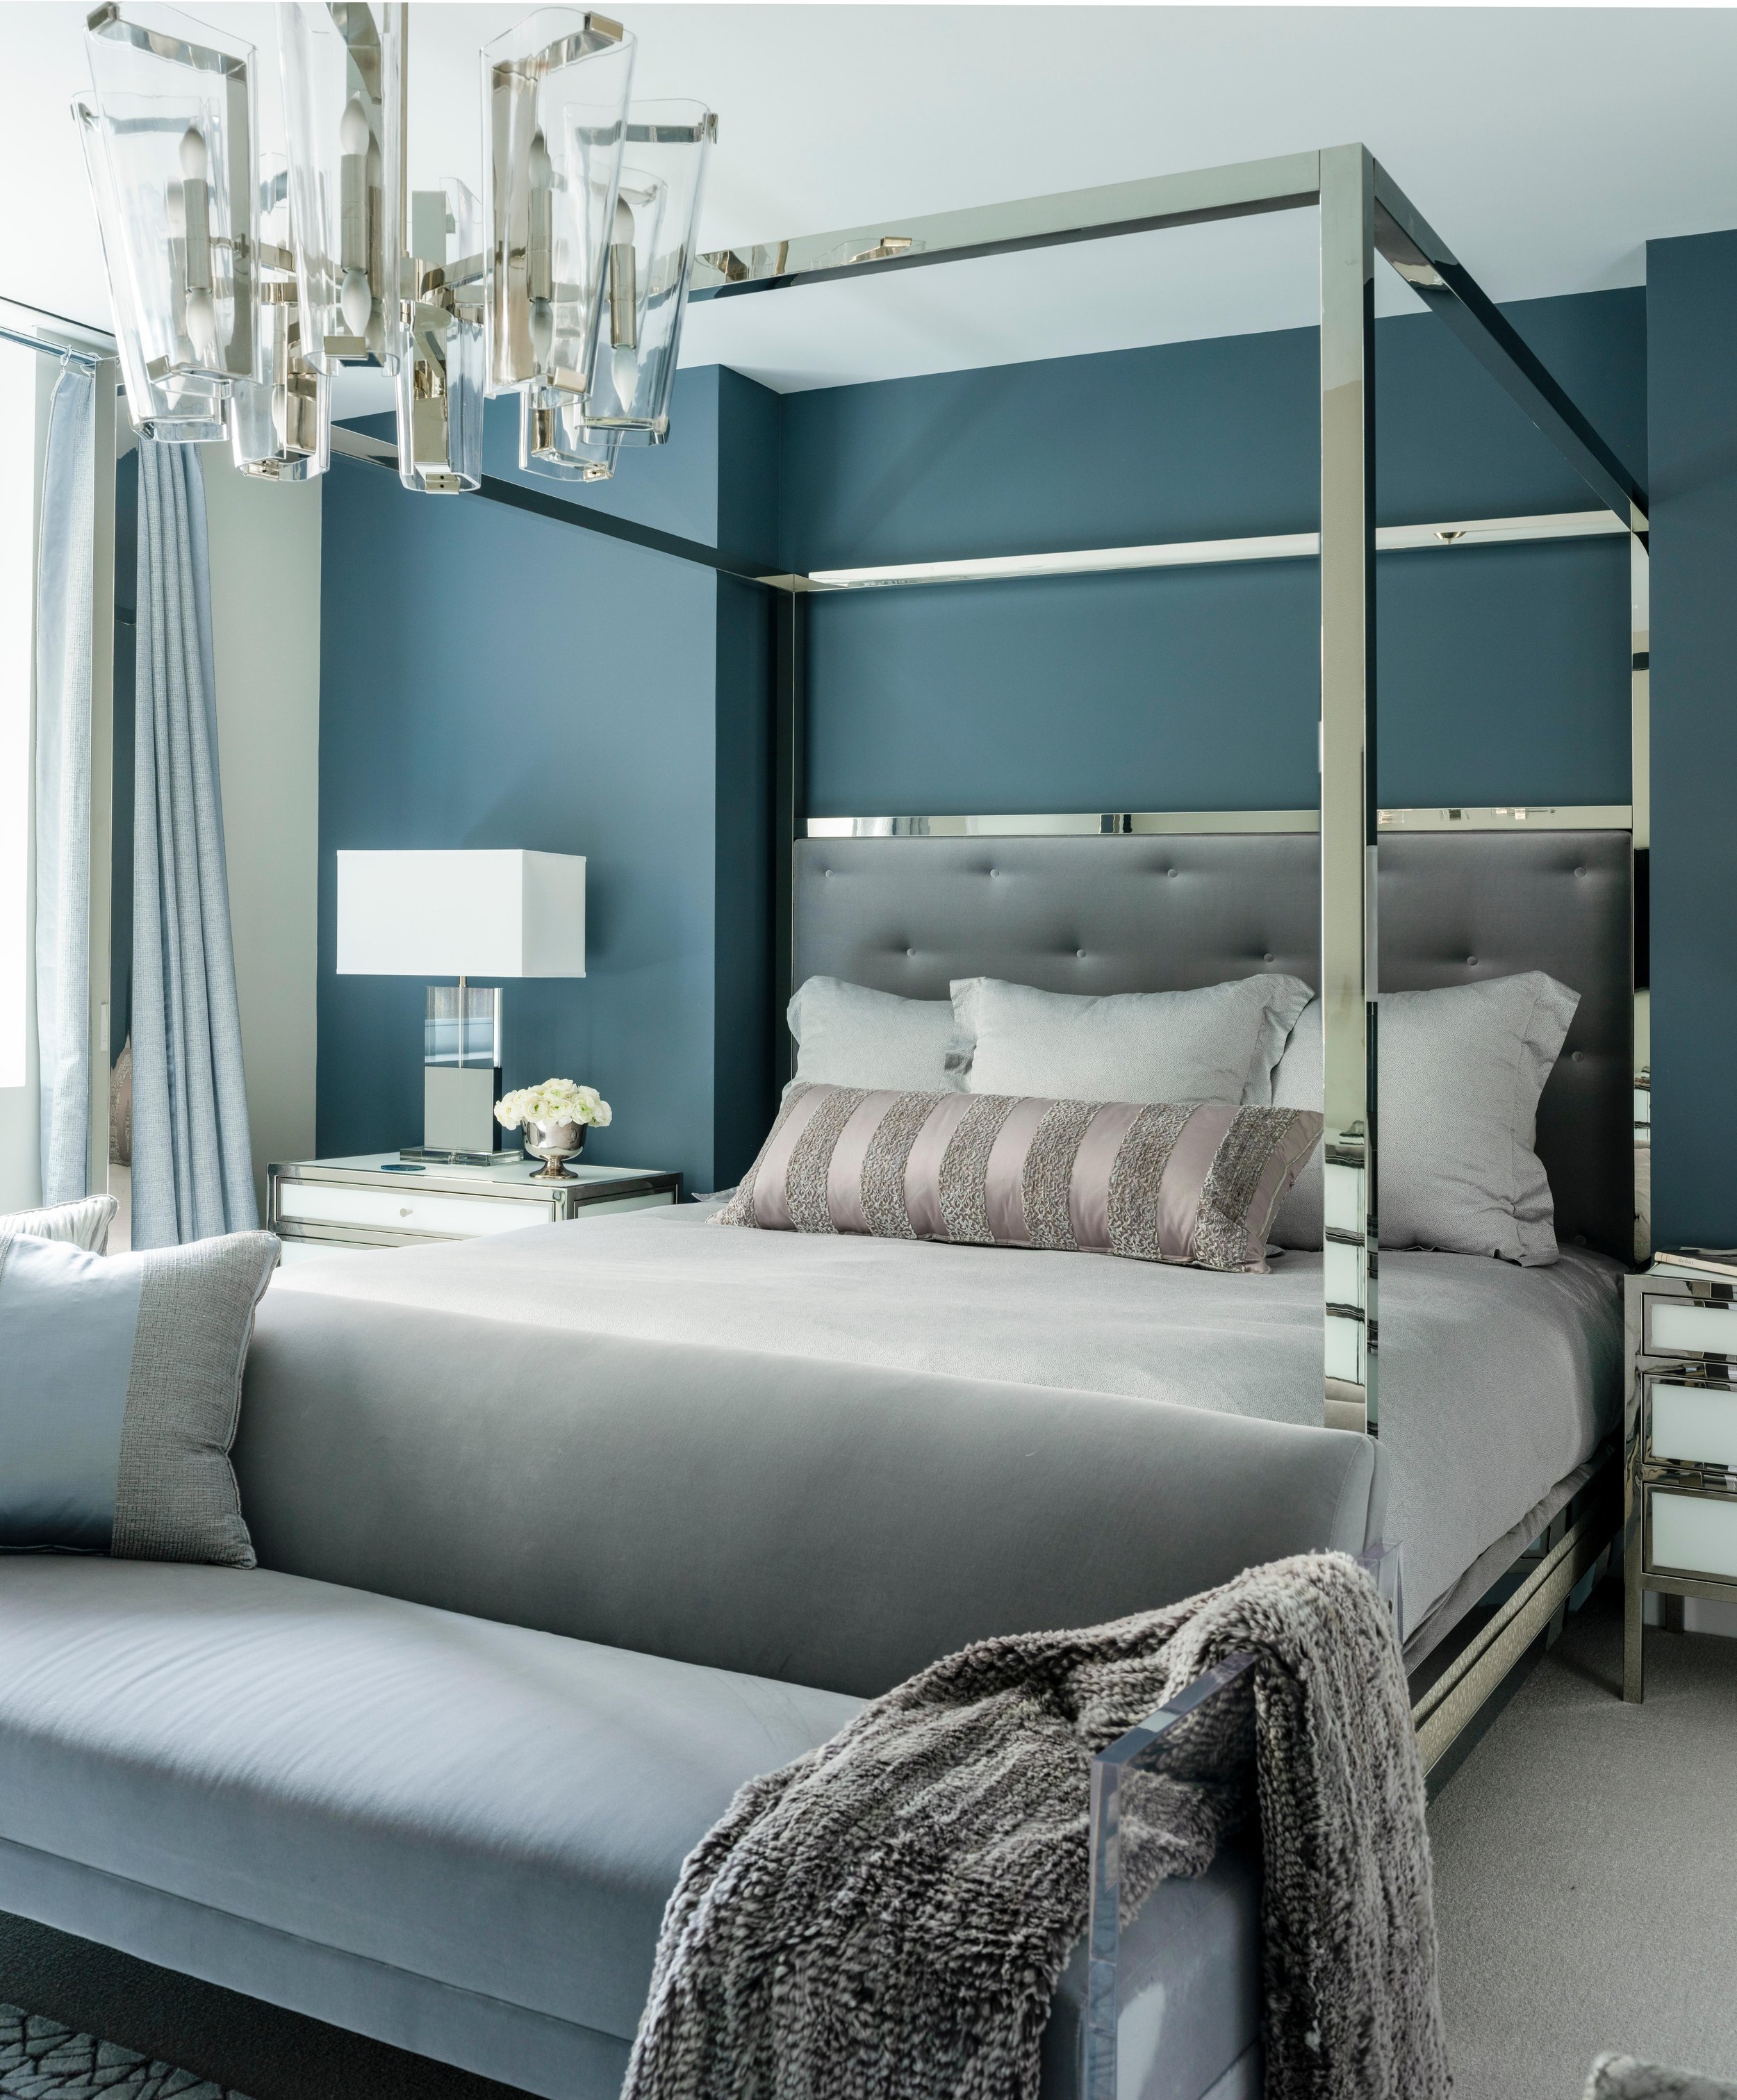 18-mirrored-bedframe-gray-accent-bedroom-teal-blue-wall-color-manhattan-penthouse-rinfret-interior-designs..jpg